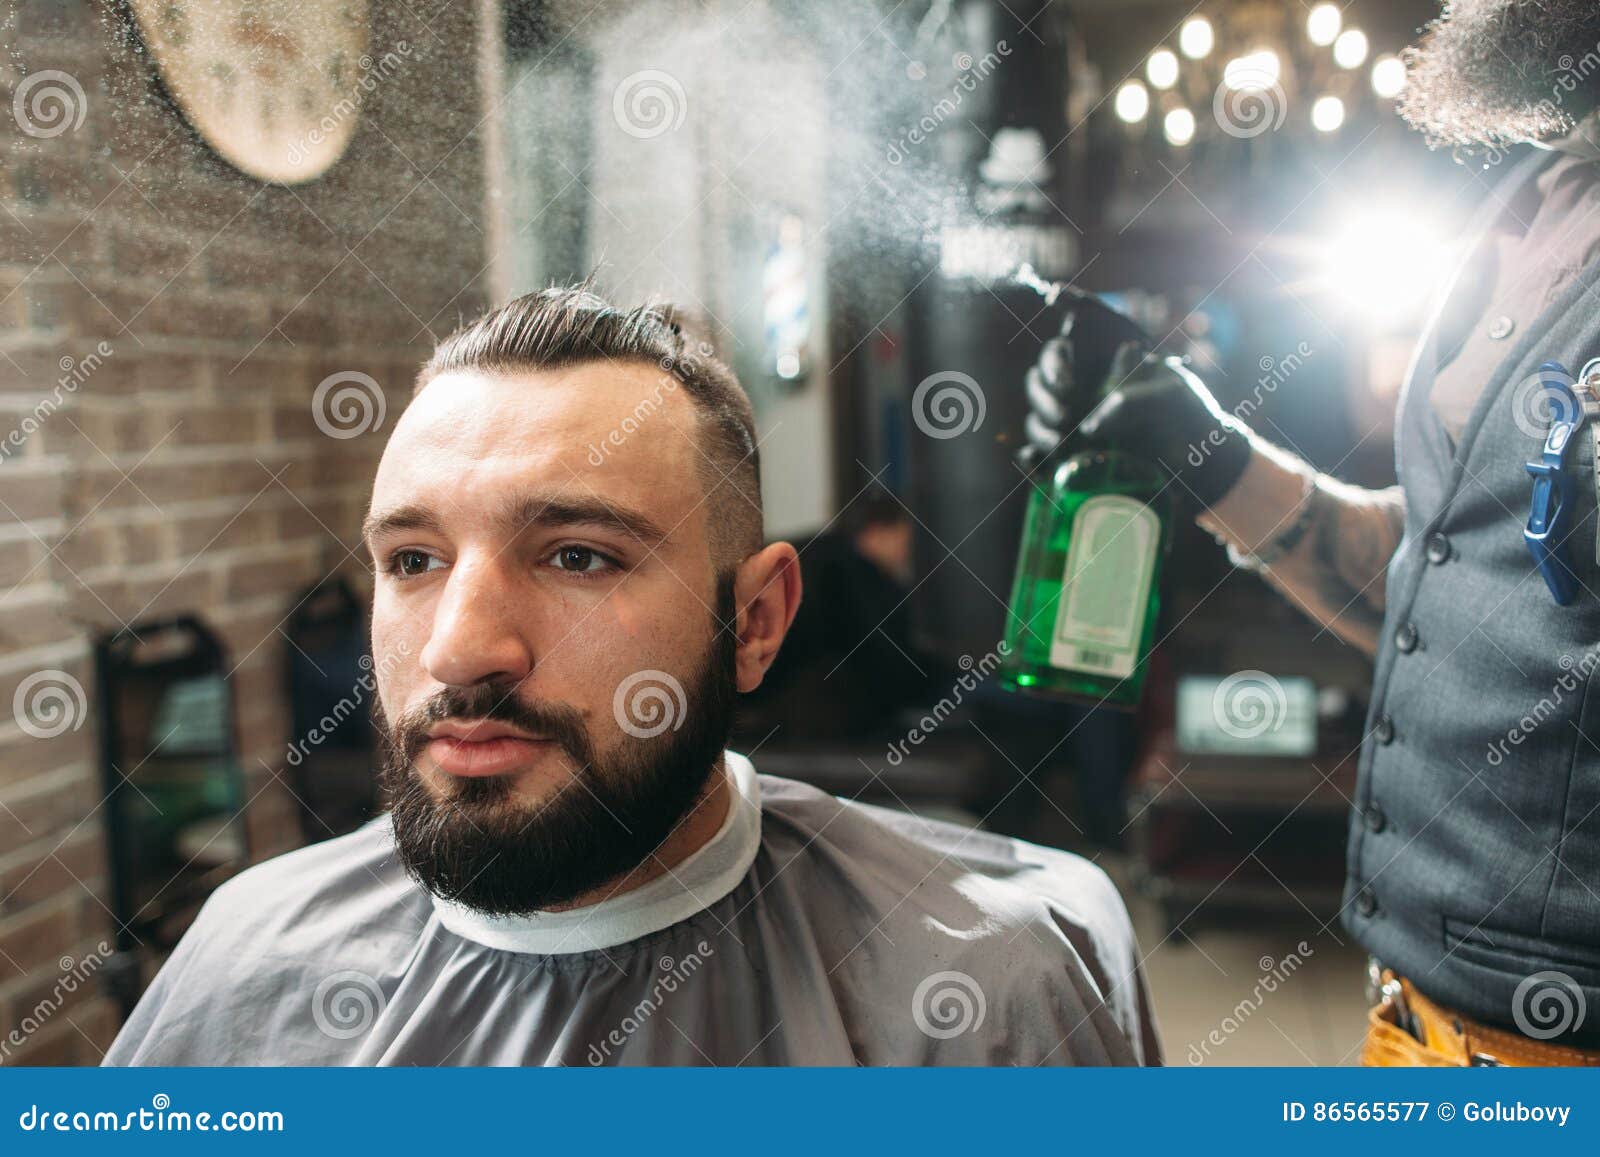 Last Step Of Haircut Barber Spray Client Stock Image Image Of